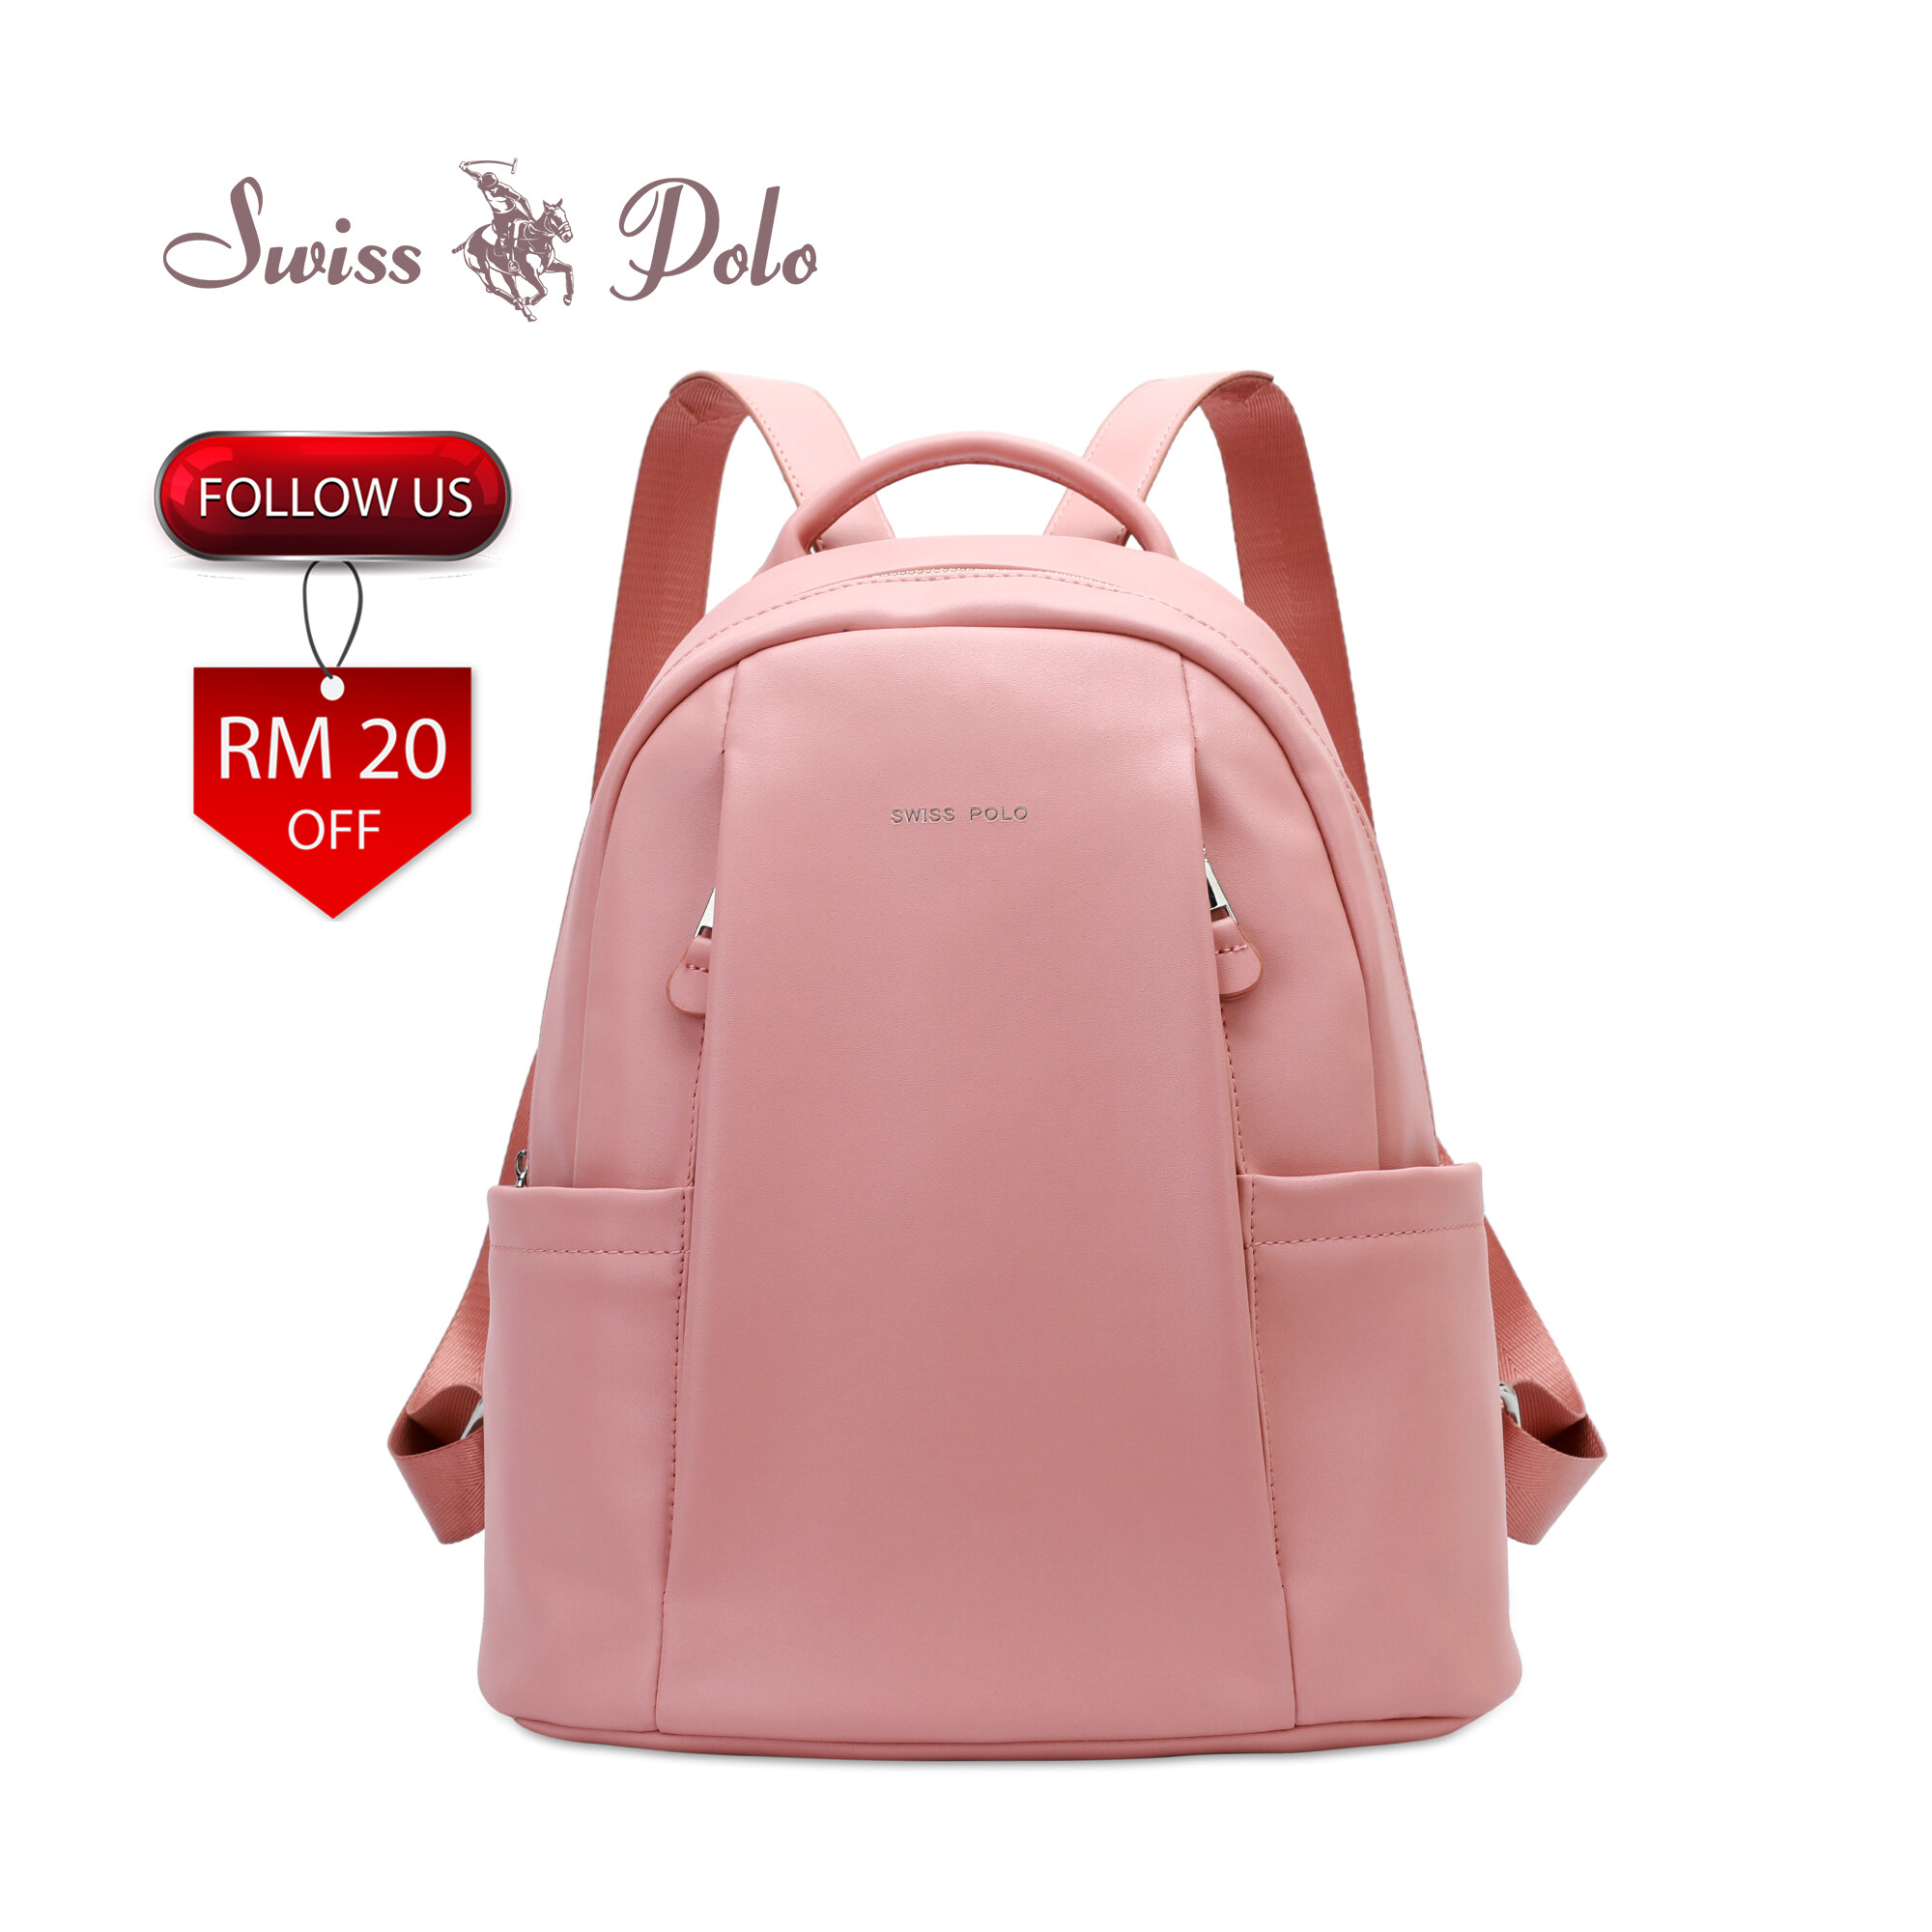 SWISS POLO Ladies Backpack HEN 7572-2 PINK